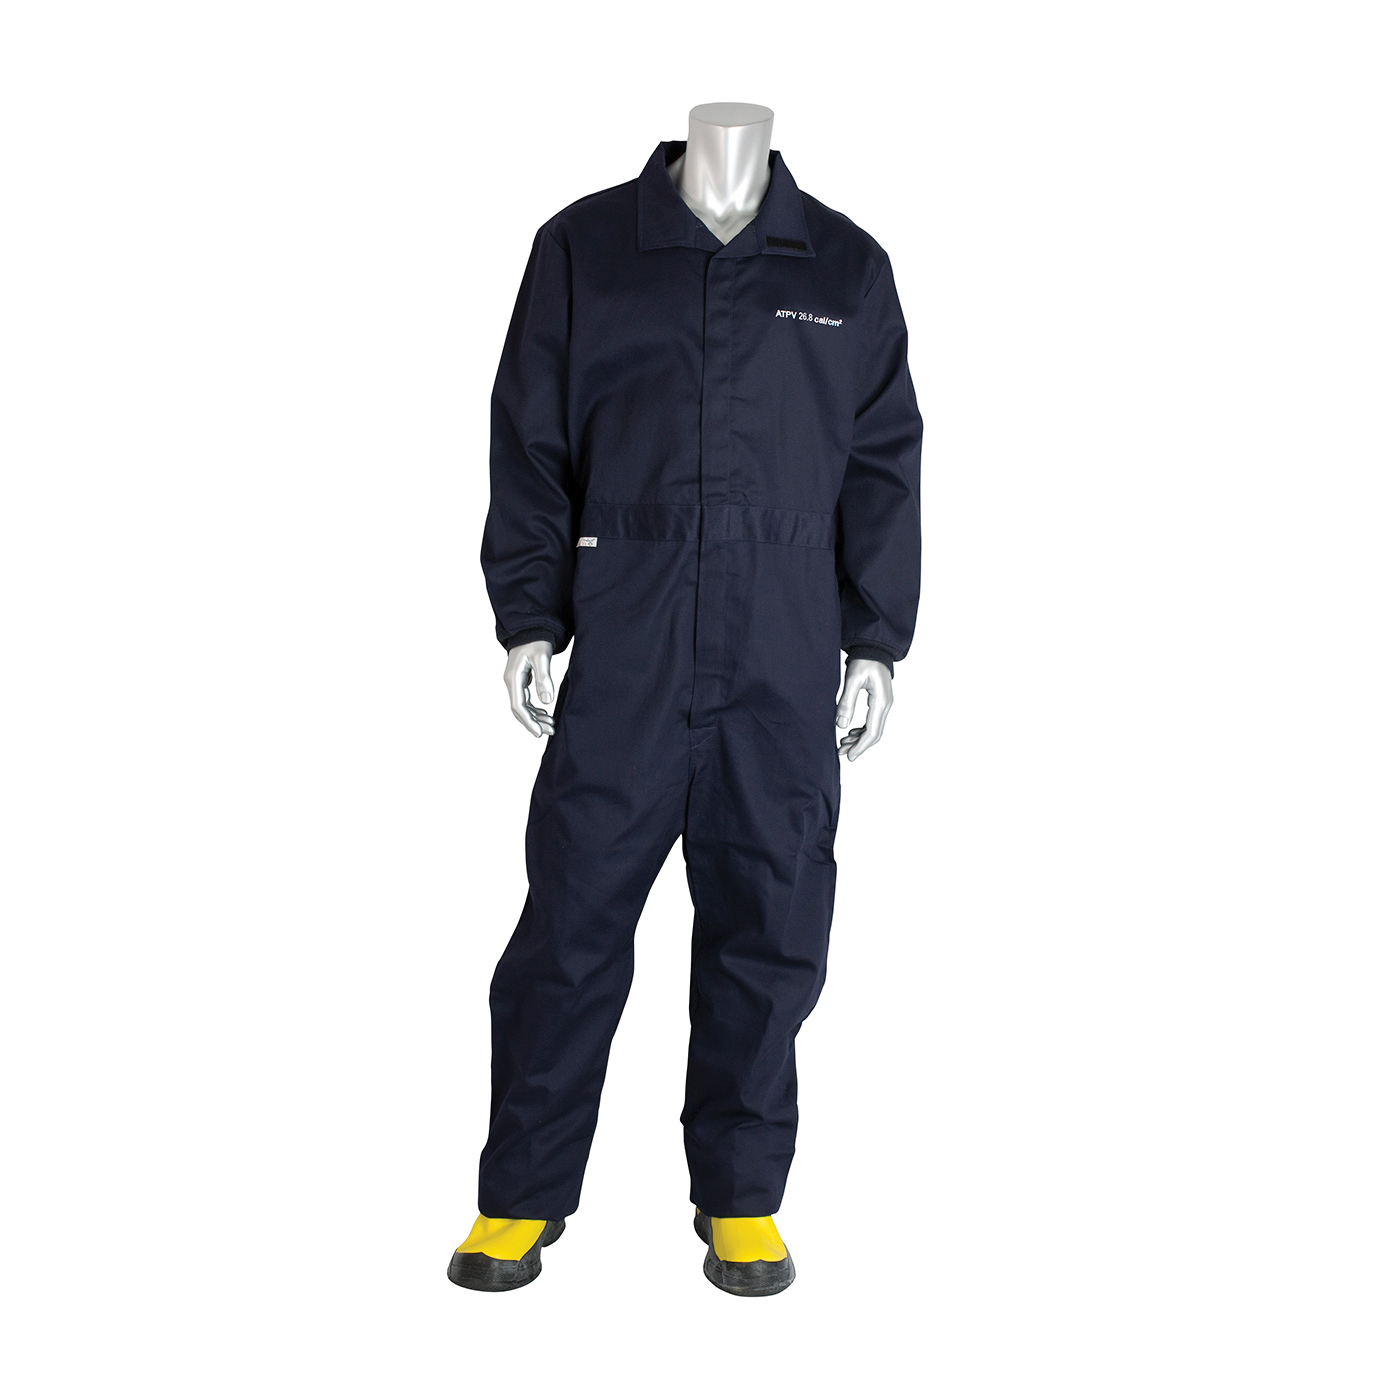 PIP® 9100-52772/4XL Flame Resistant Coverall, 4XL, Navy, Westex® Ultra Soft®/88% Cotton/12% Nylon, 60 to 62 in Chest, 32 in L Inseam